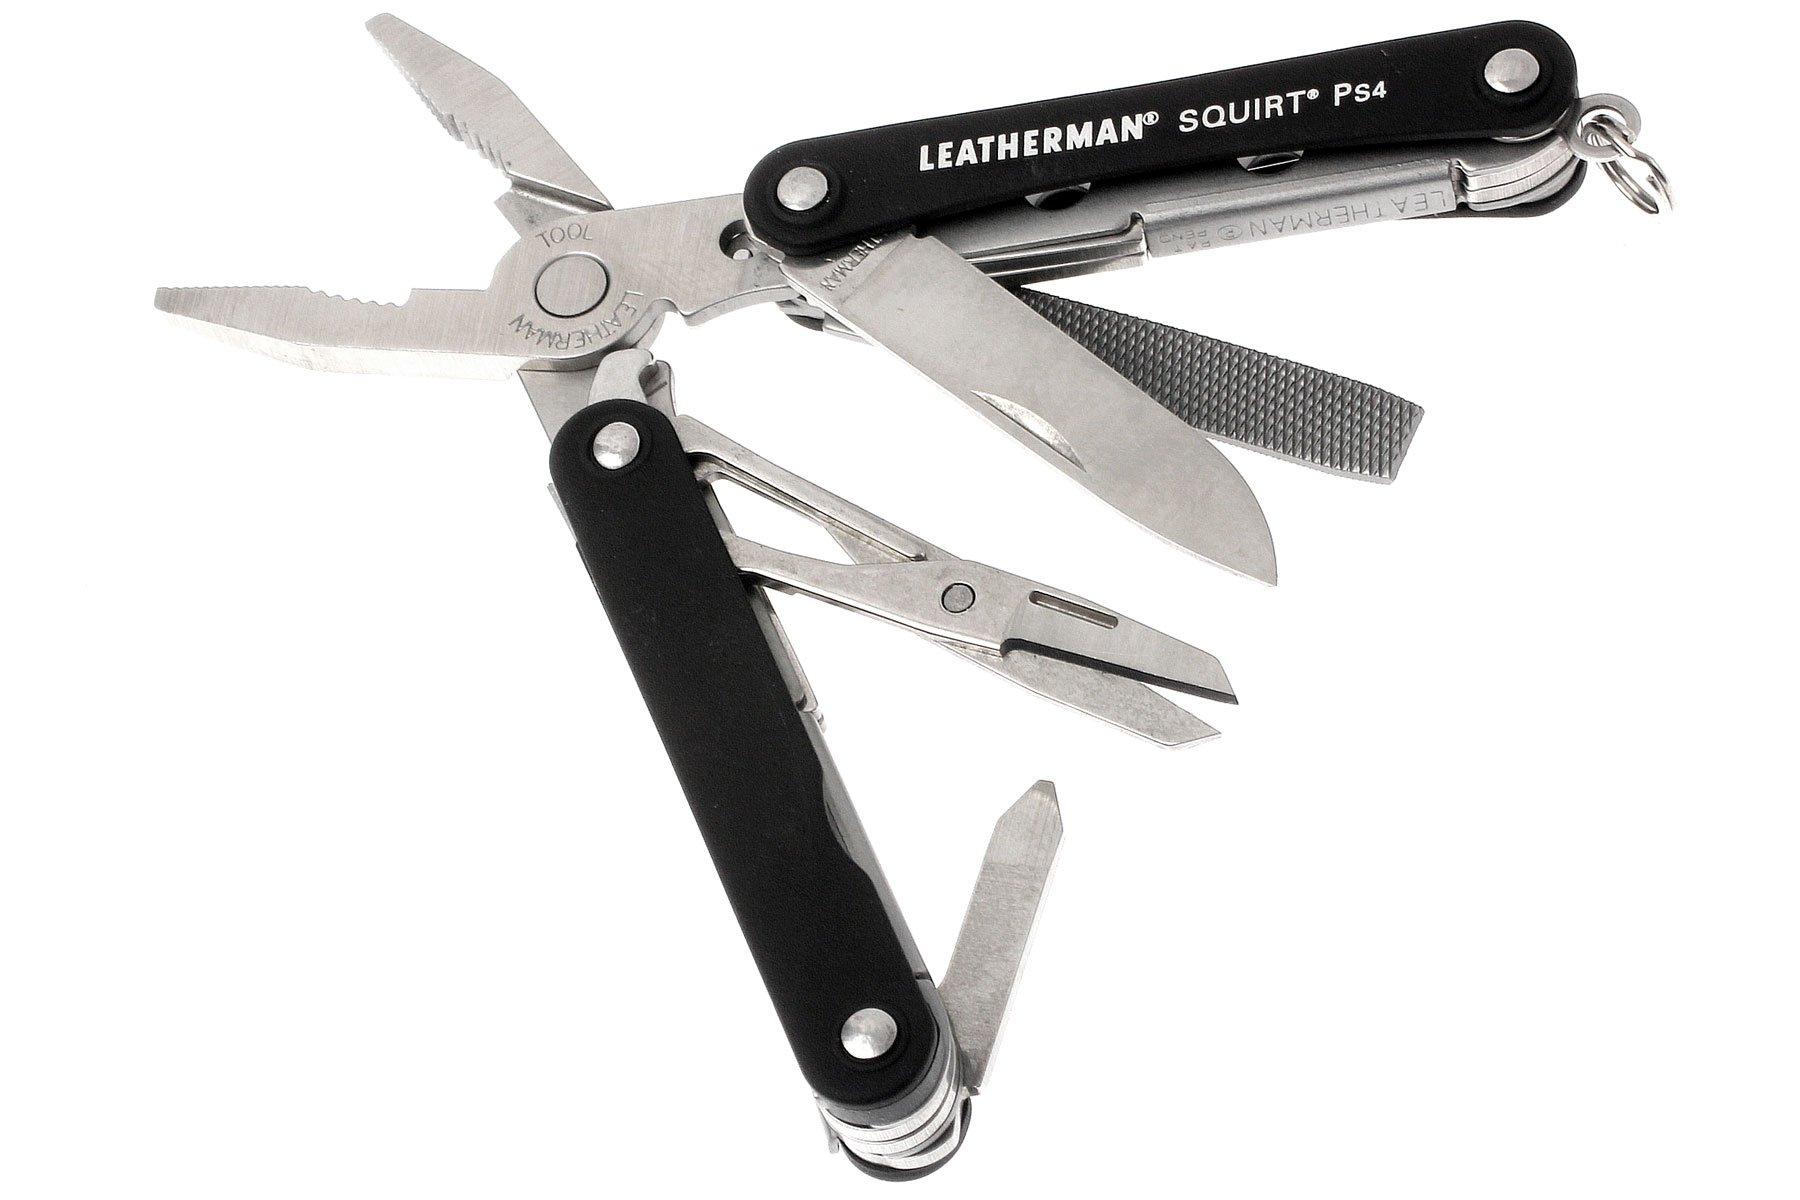 Stol komme ud for Holde Leatherman Squirt PS4, black | Advantageously shopping at Knivesandtools.com